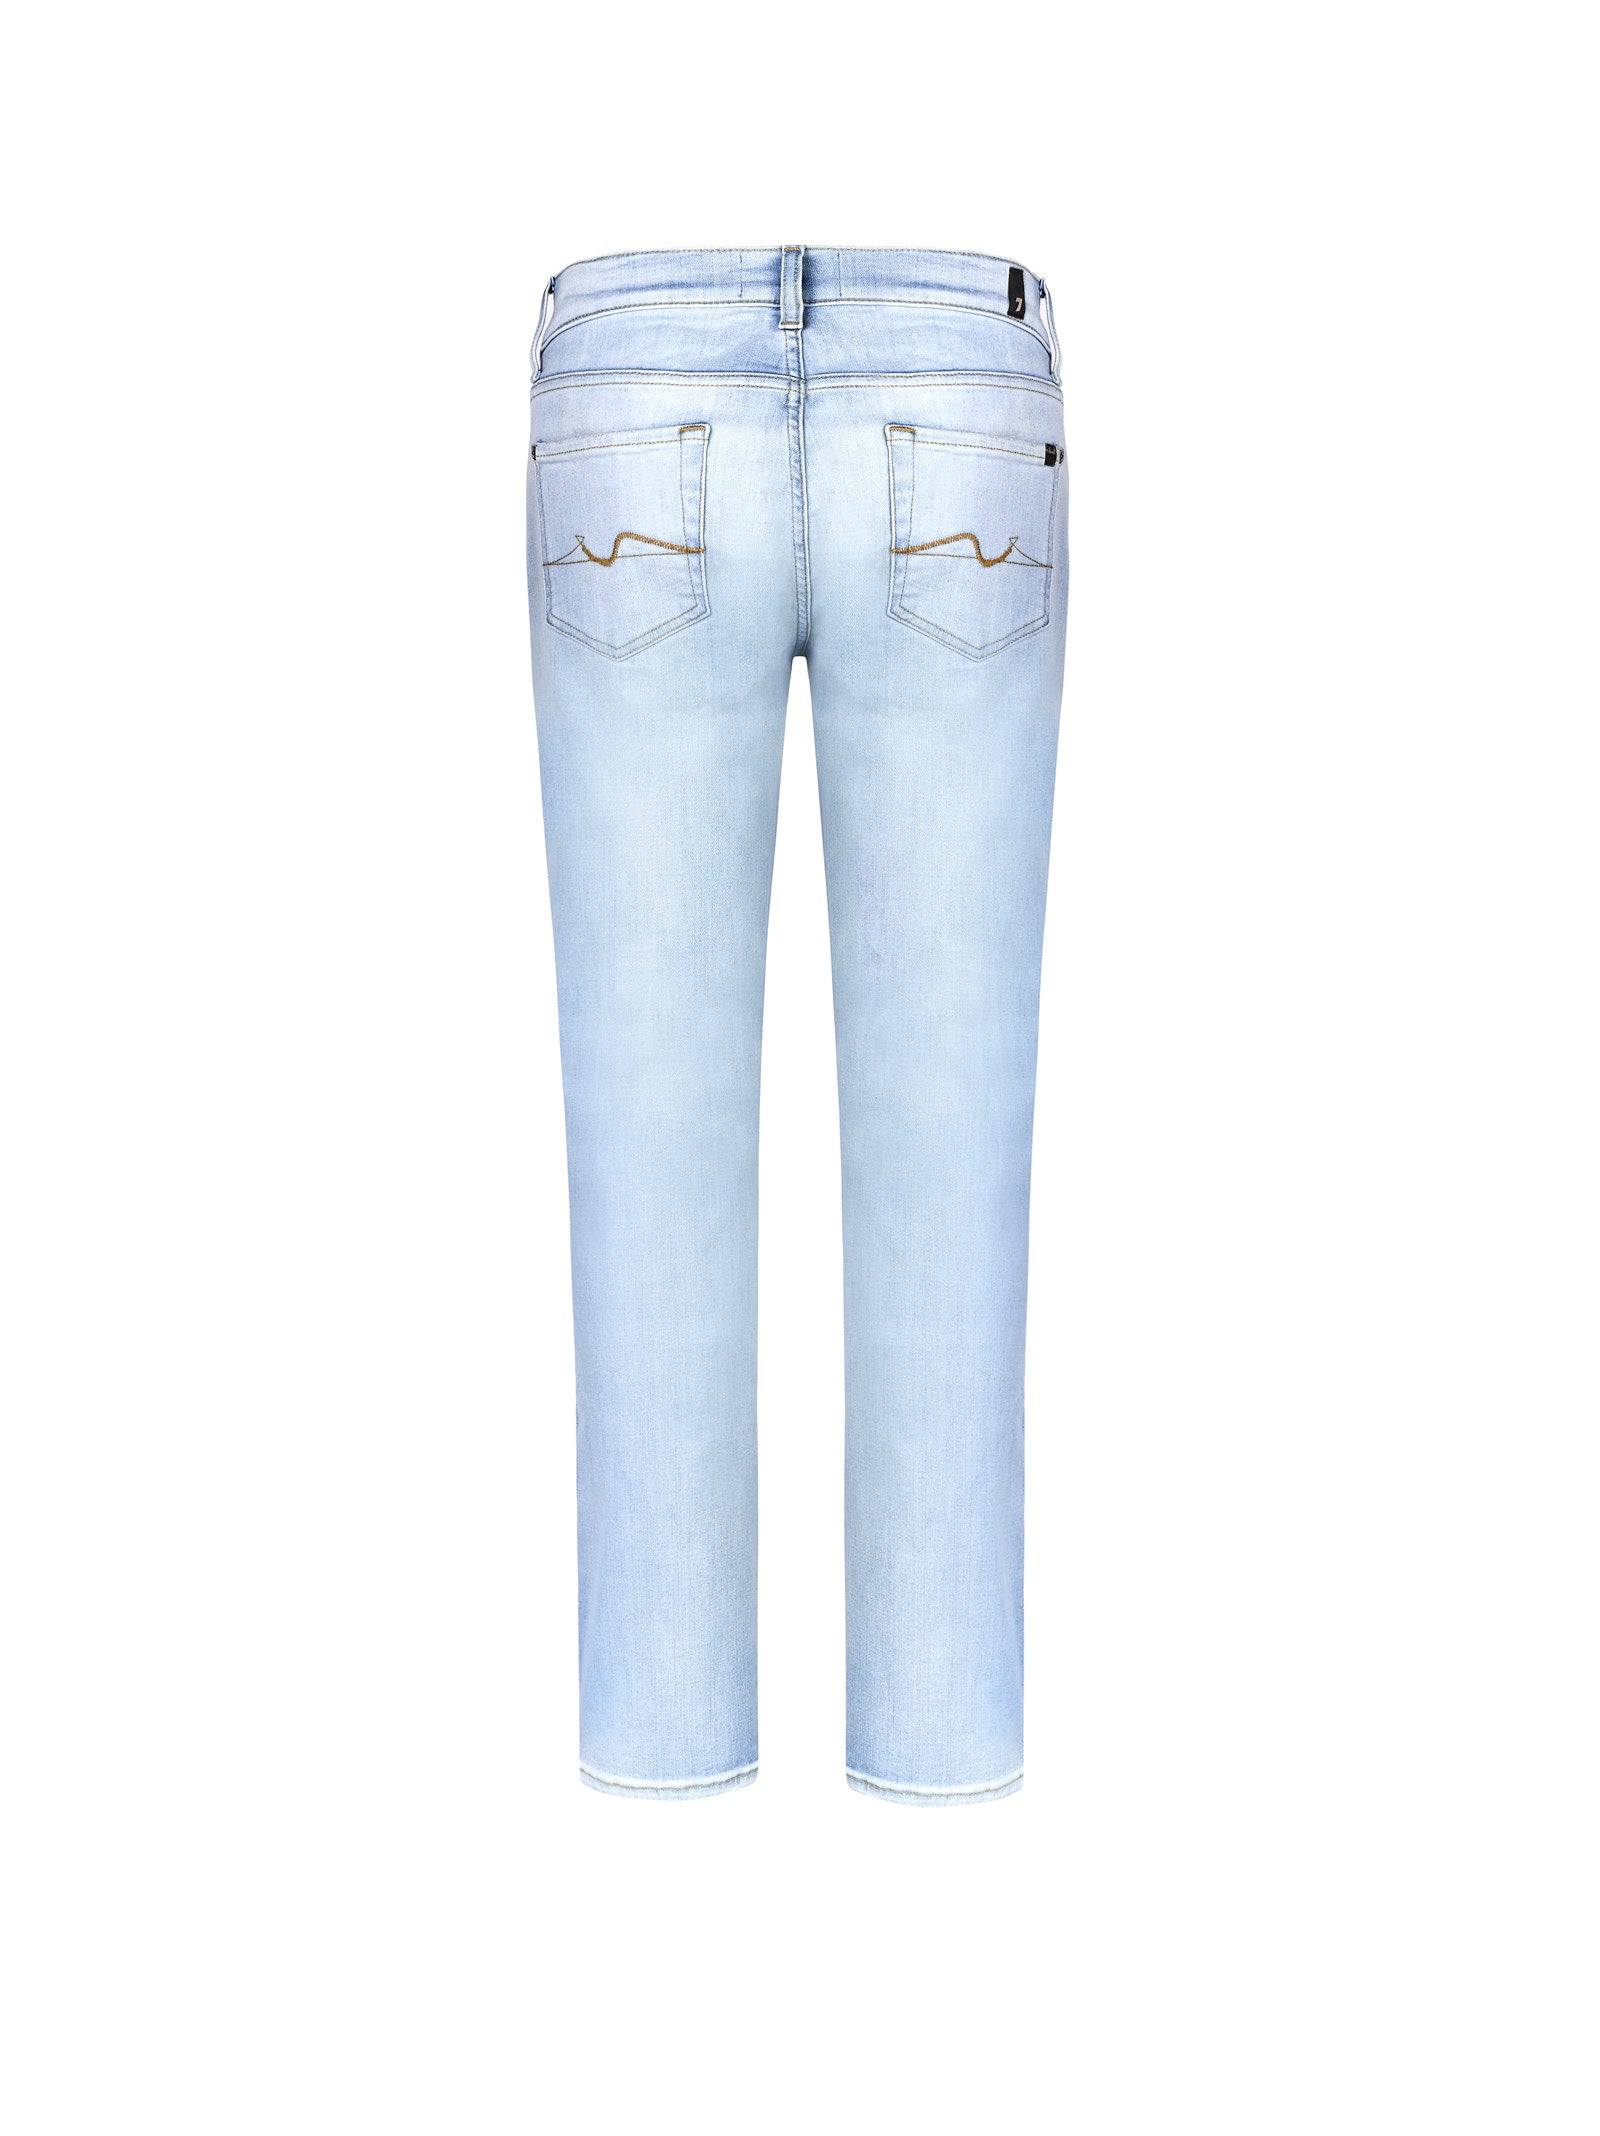 Jeans 7 FOR ALL MANKIND
Blue